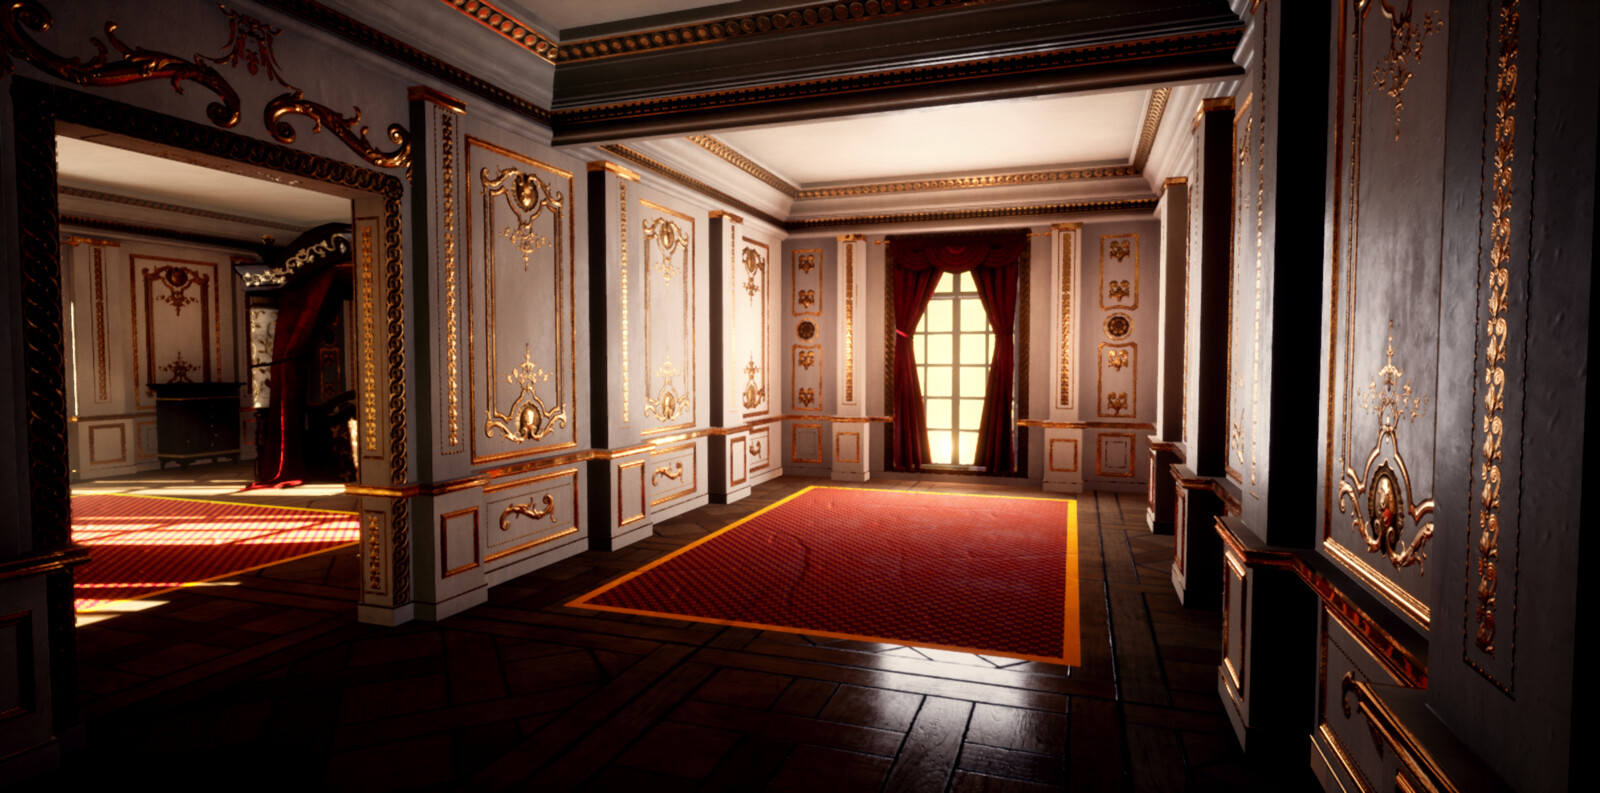 Another daytime render in Unreal, this one being the hallway outside the bedroom.